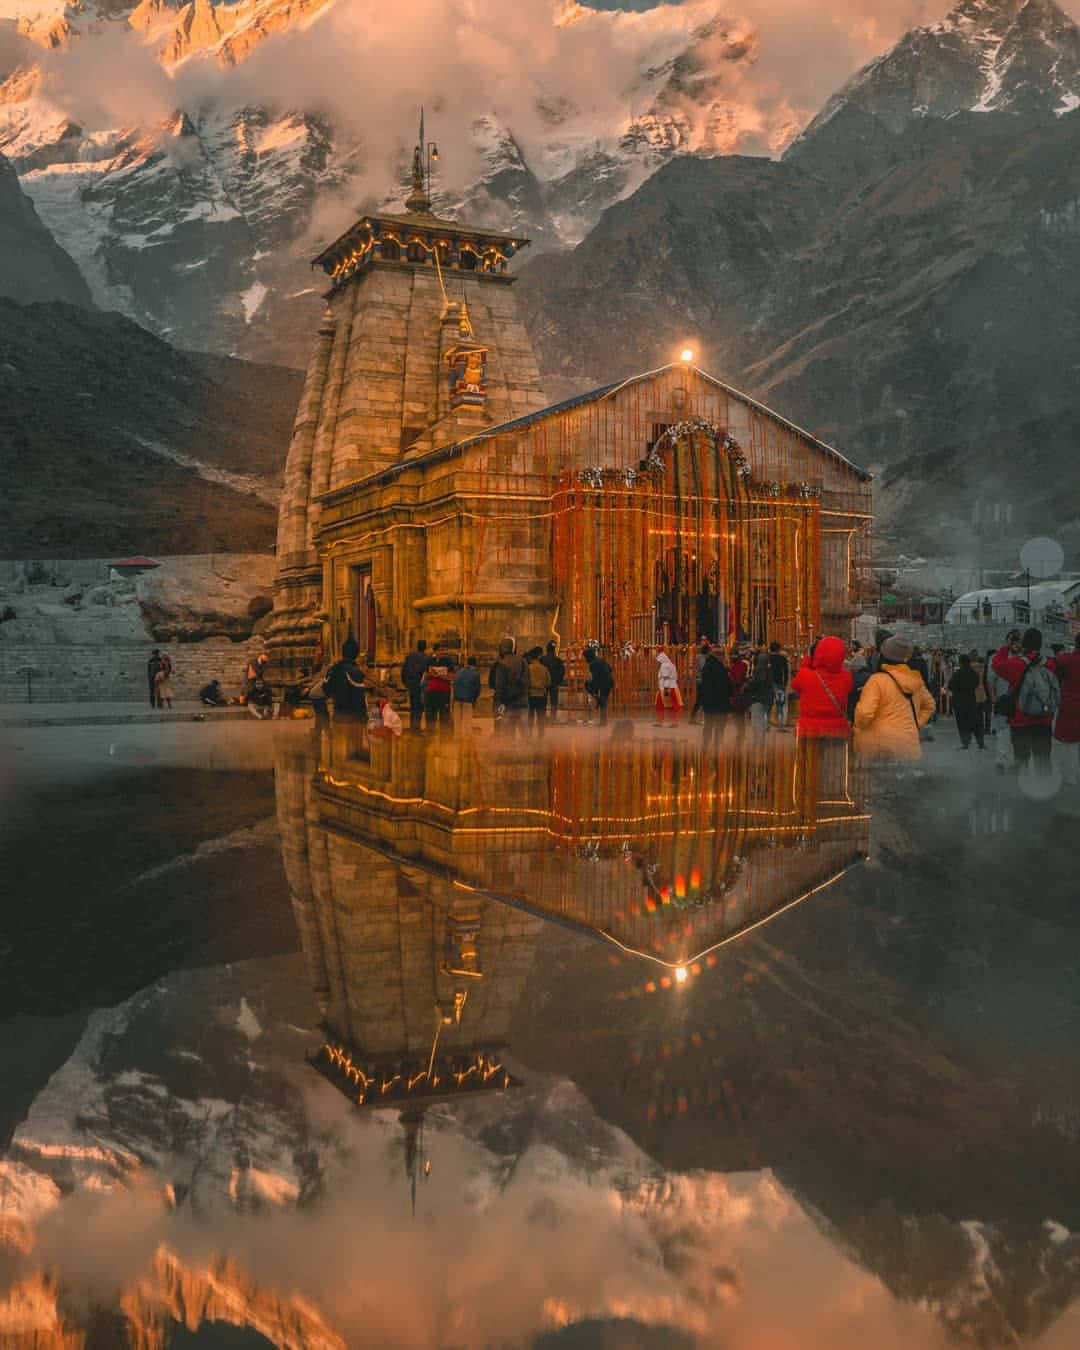 A view of the Kedarnath Temple